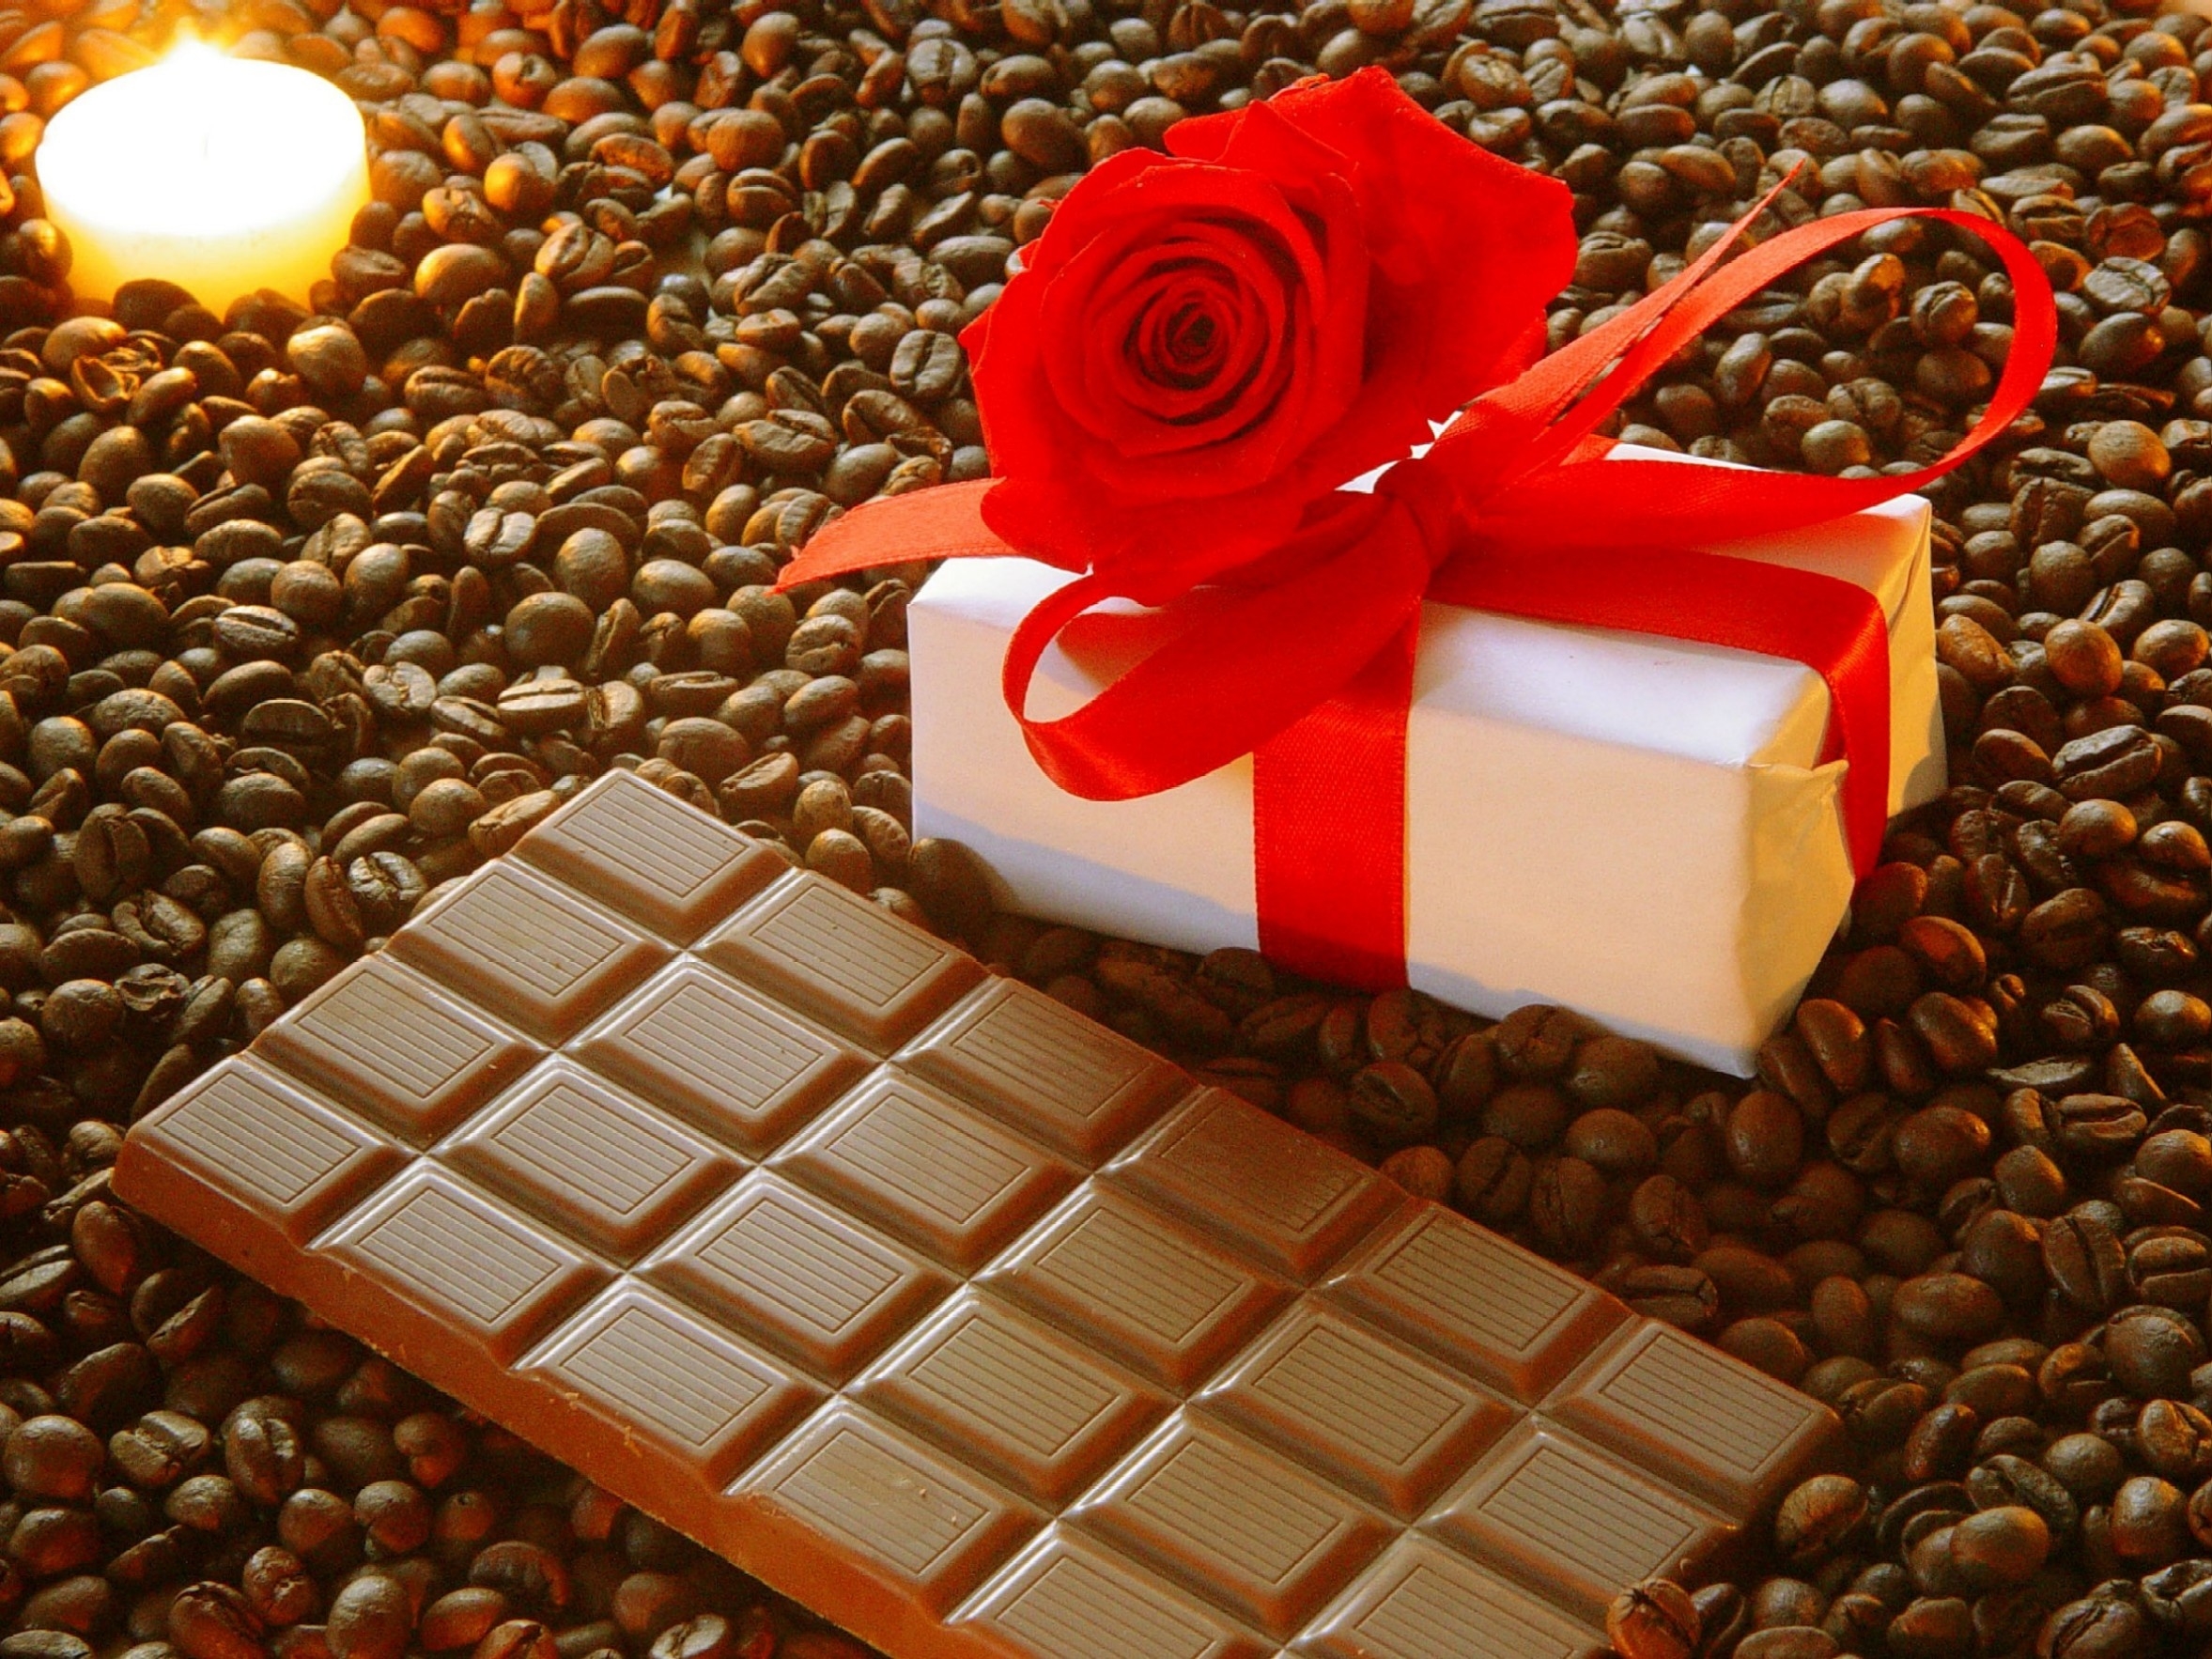 romance, food, chocolate, coffee, rose flower, rose, holiday, present, gift, bow, grains, candle, grain lock screen backgrounds